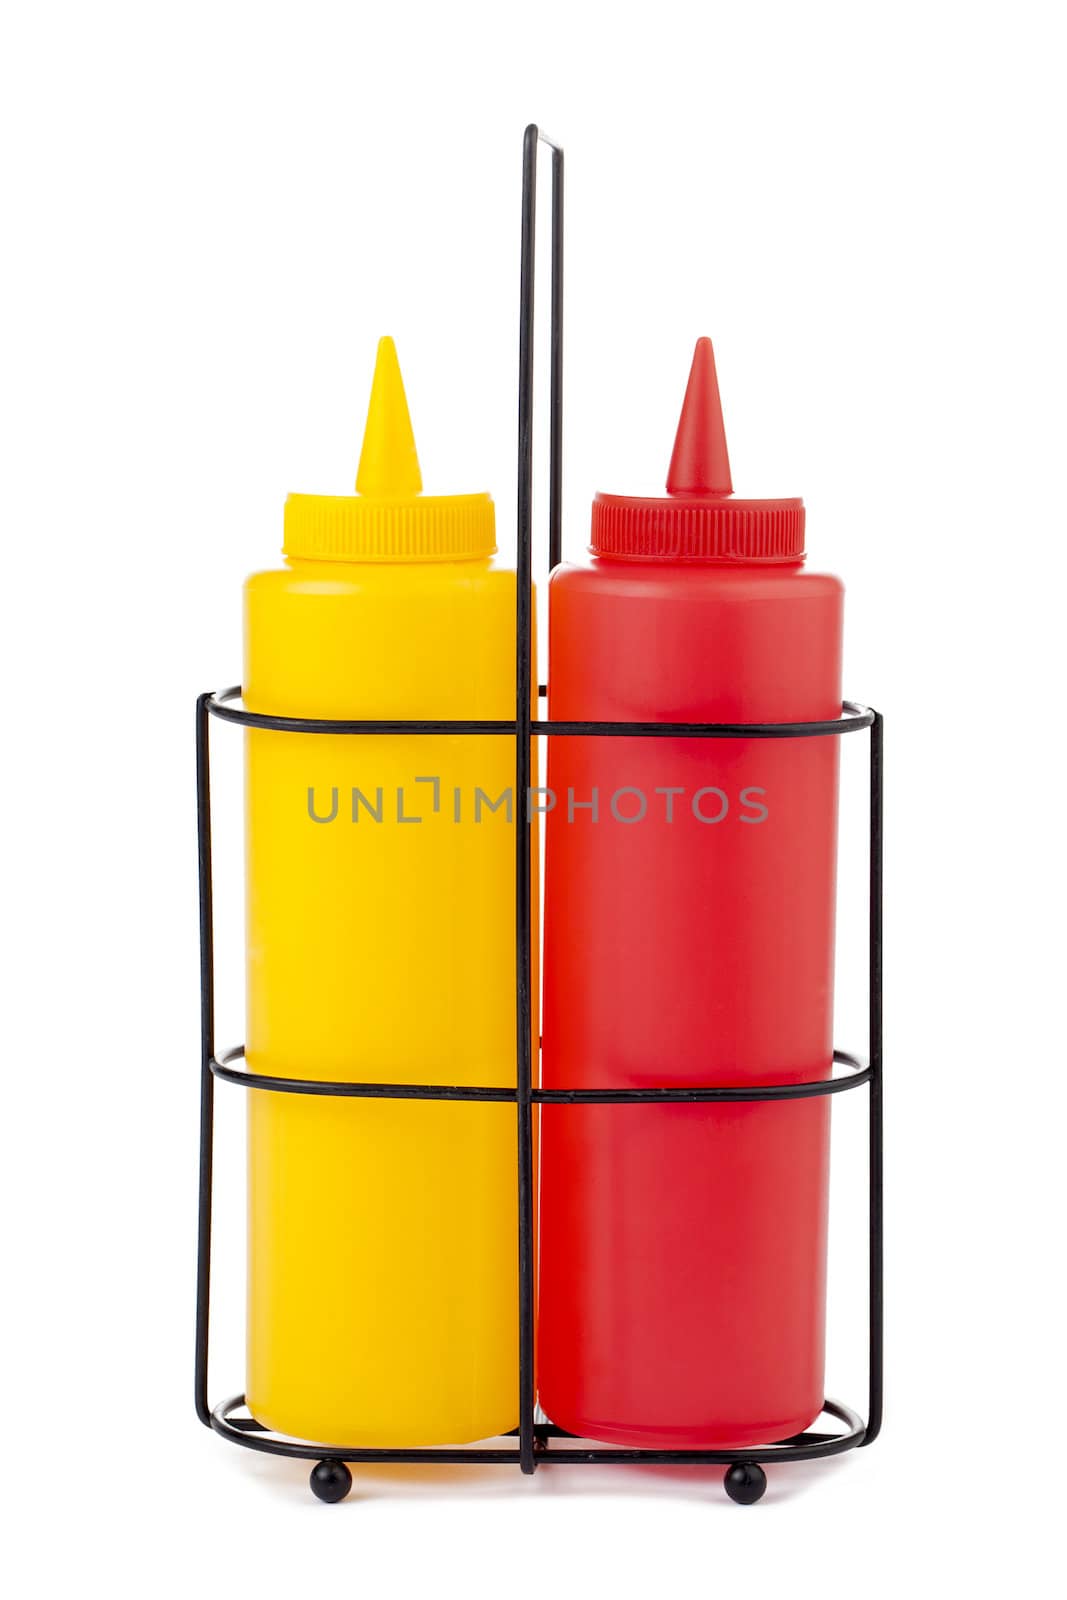 mustard and catsup bottle by kozzi